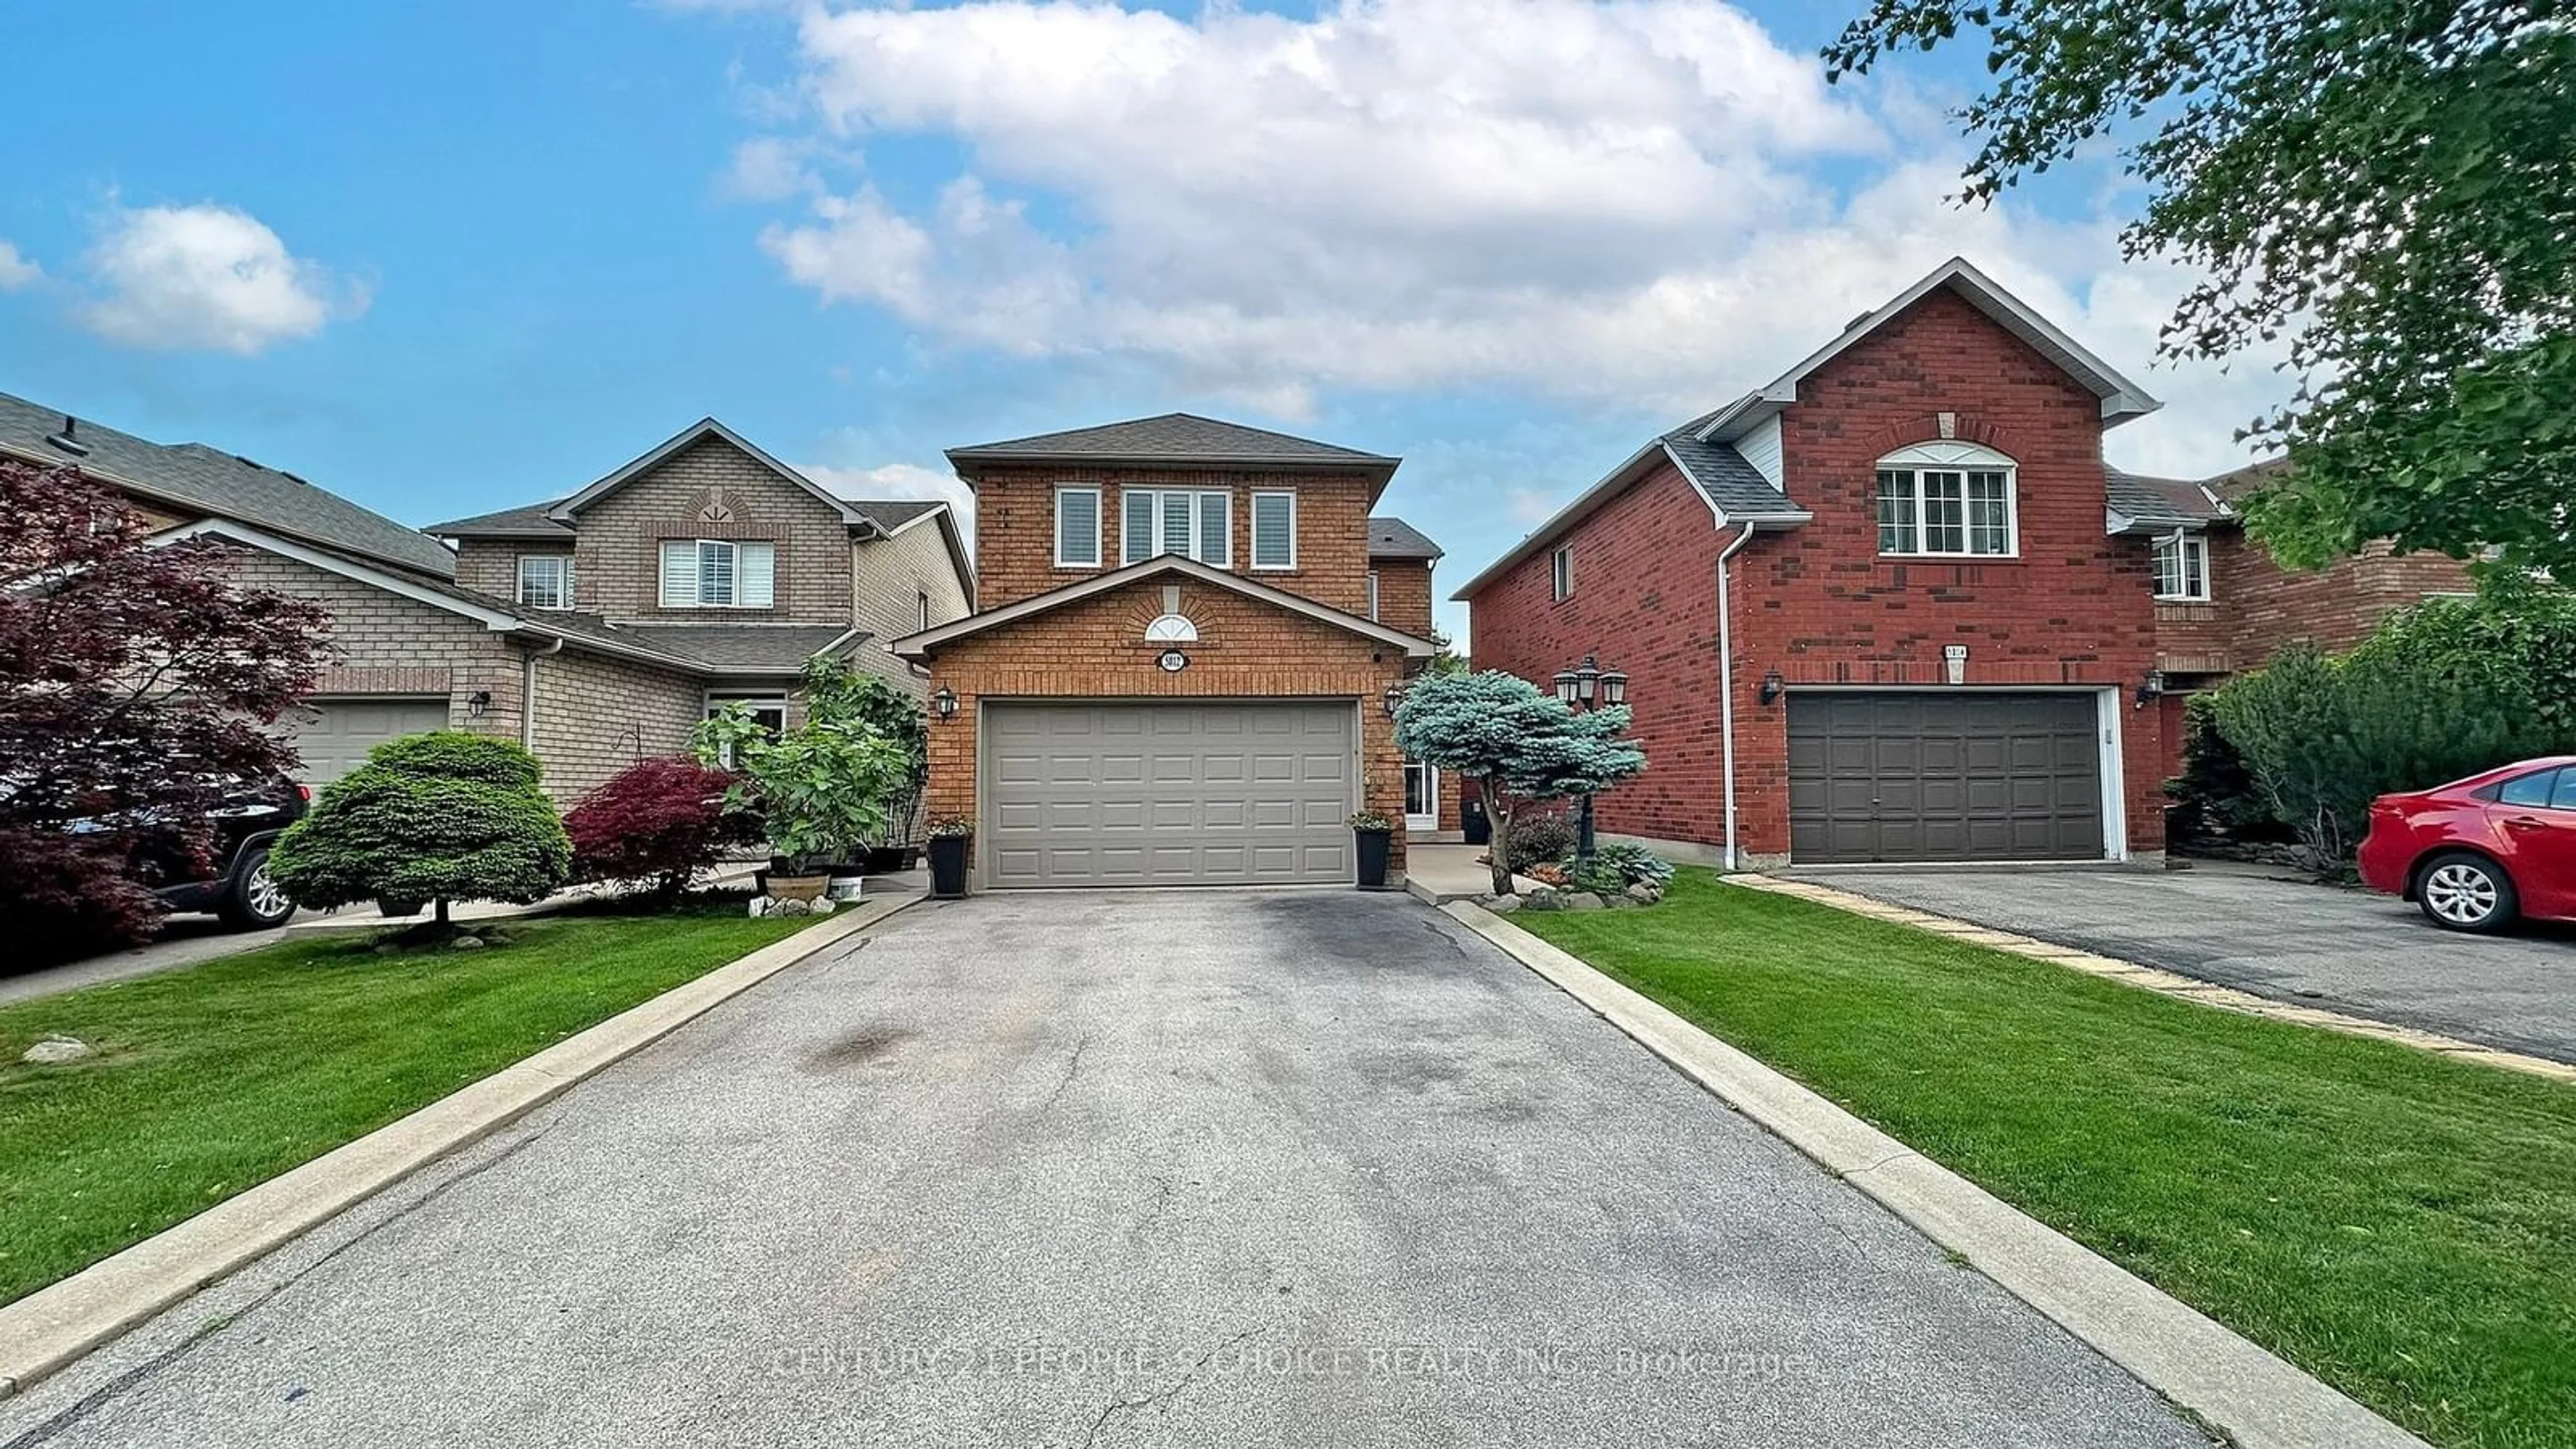 Home with brick exterior material for 5812 Sidmouth St, Mississauga Ontario L5V 2K3